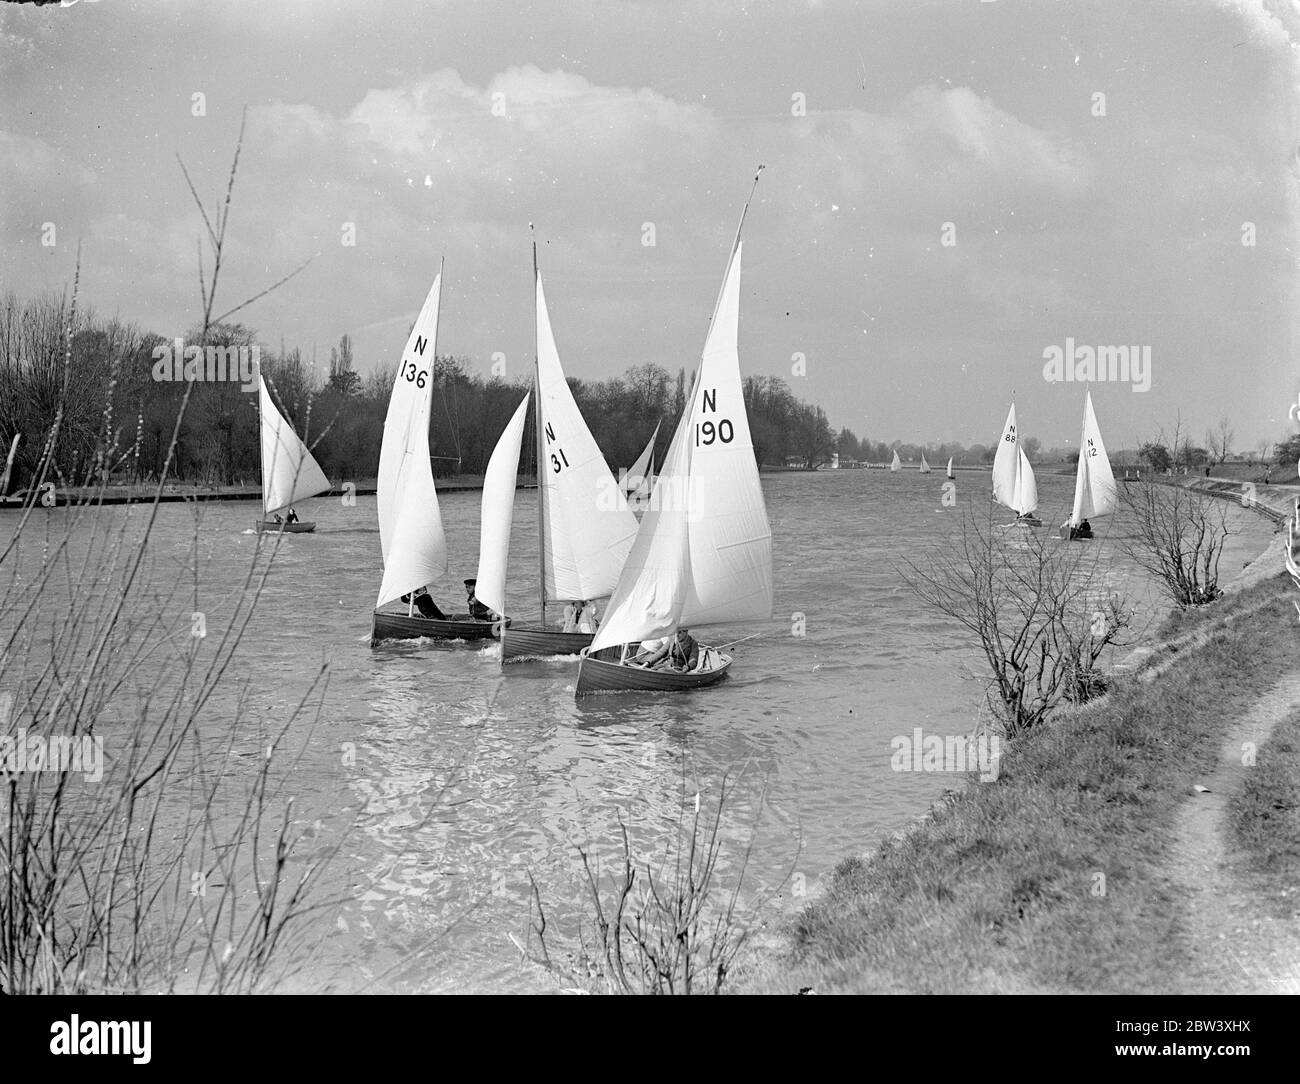 The Tamesis Sailing Club held an Easter Saturday yacht meeting at Teddington. A stiff breeze provides plenty of fuel for the sails and a ducking for some competitors. Photo shows: yachts make an attractive seascape for land bound Londoners as they scud before the breeze at Teddington 27th March 1937 Stock Photo